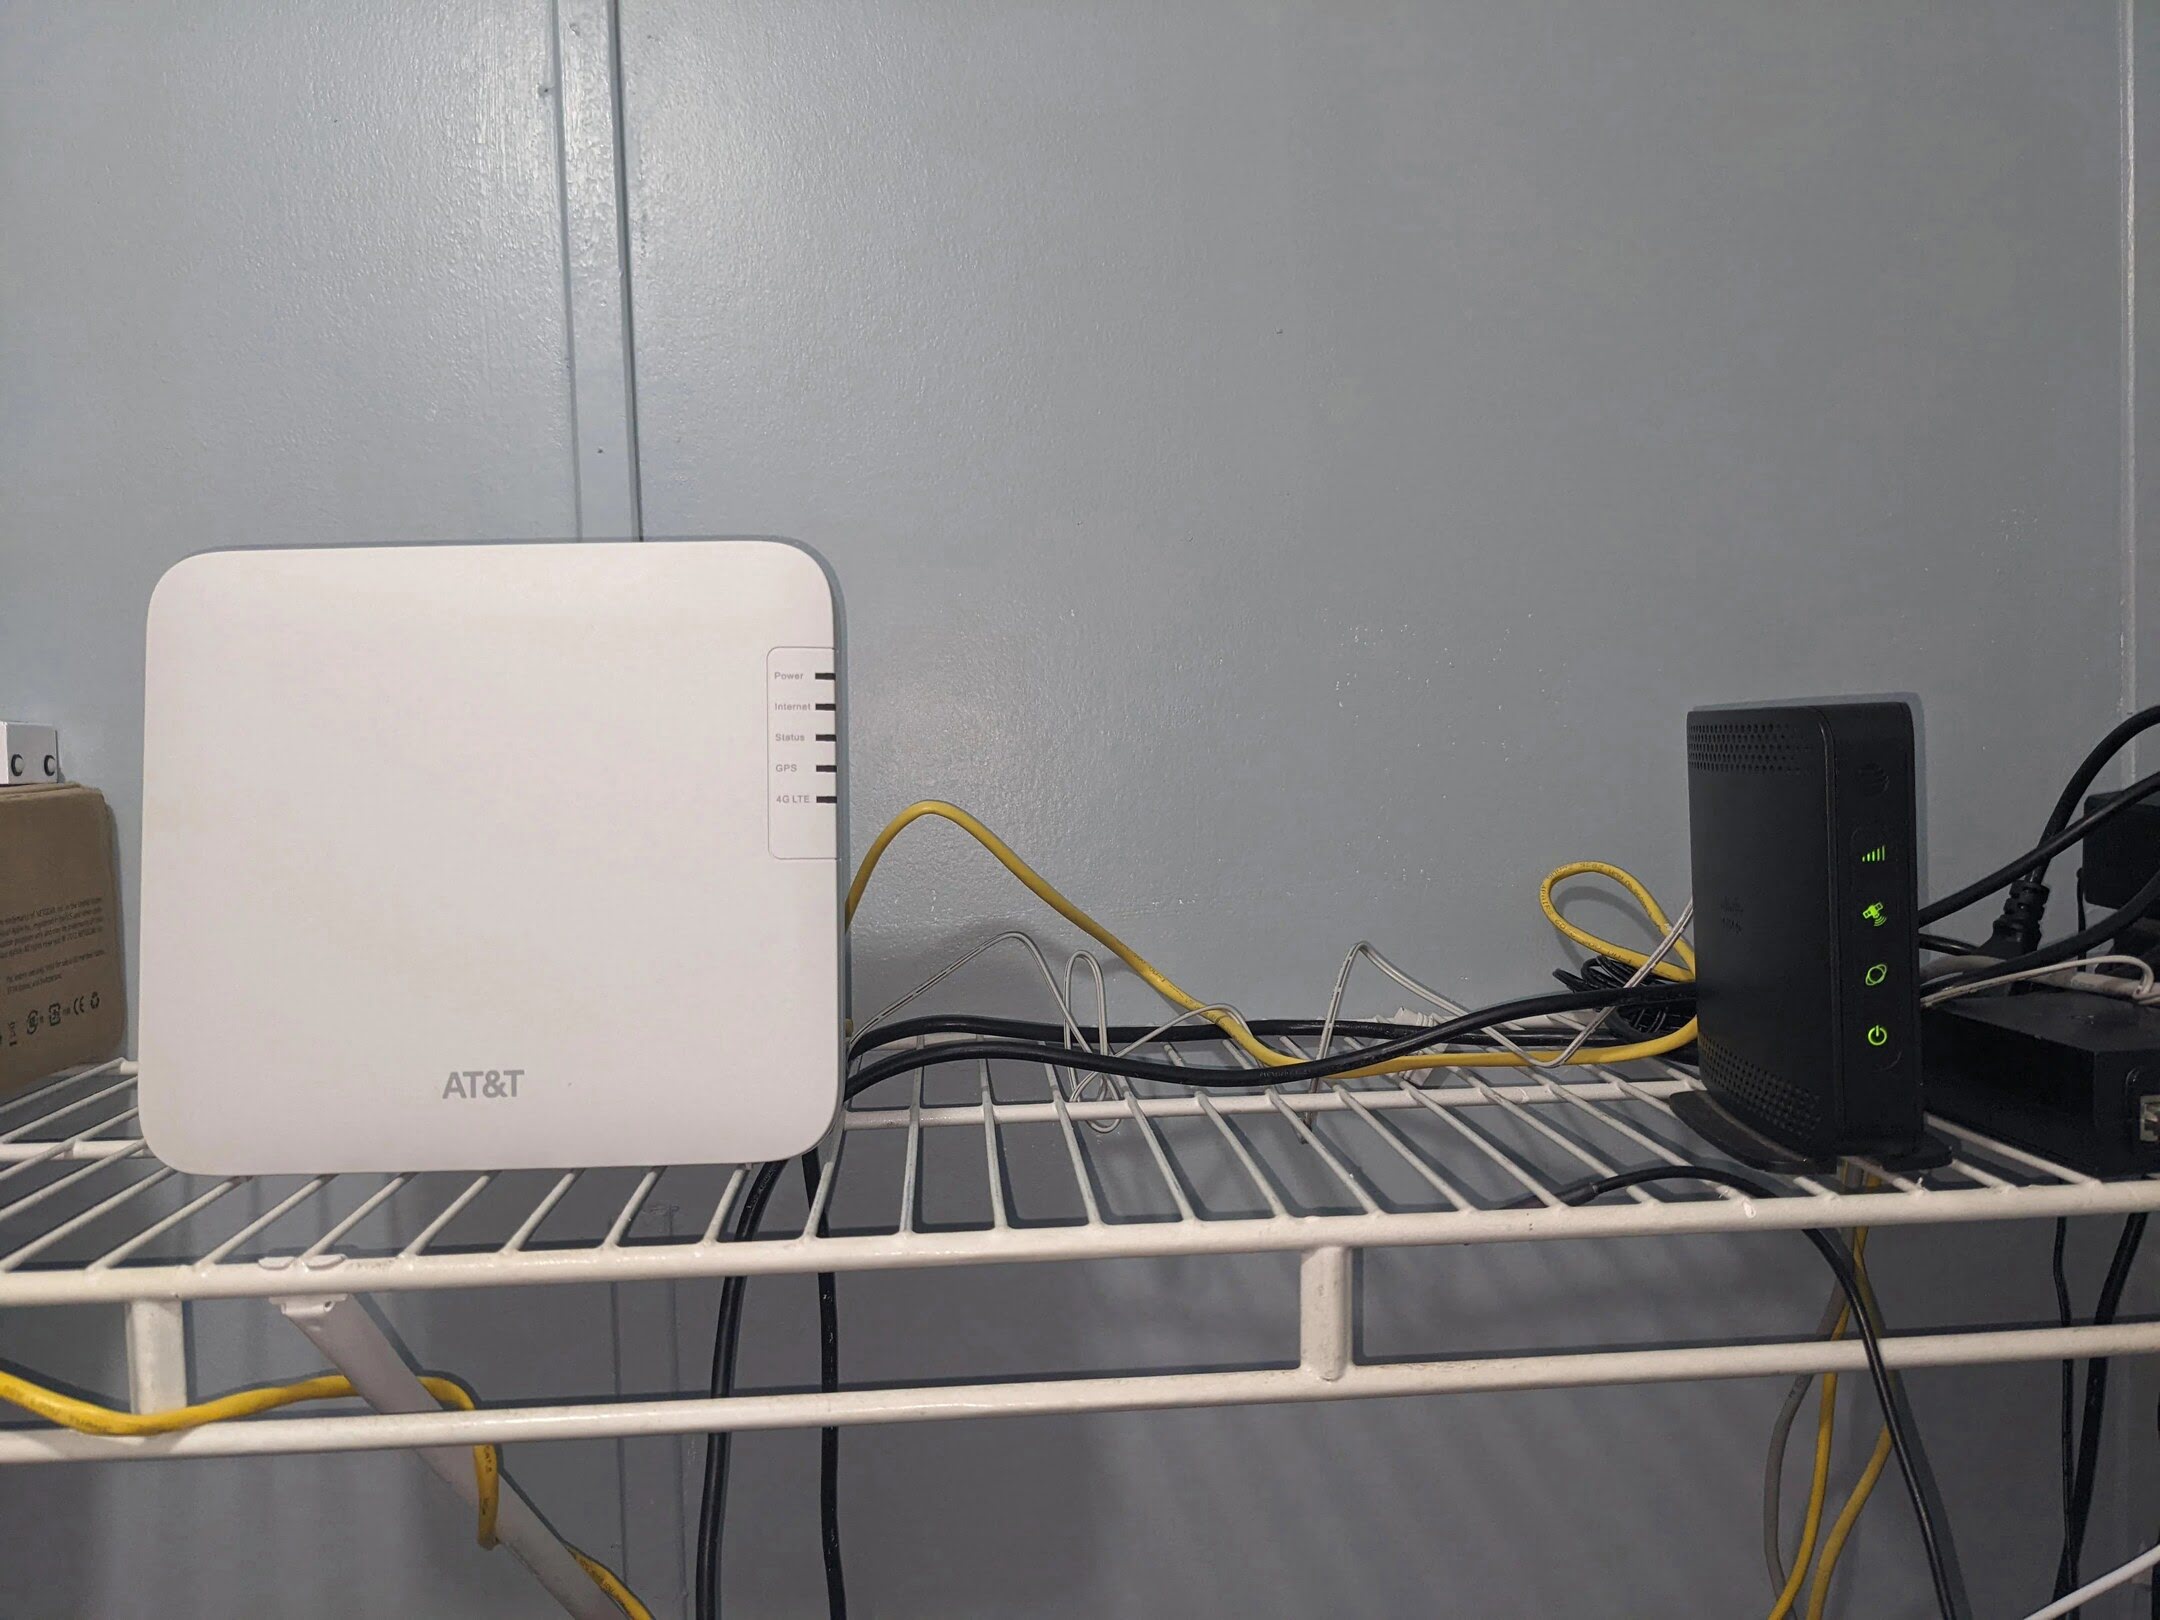 How To Change The Channel On An AT&T Wi-Fi Router